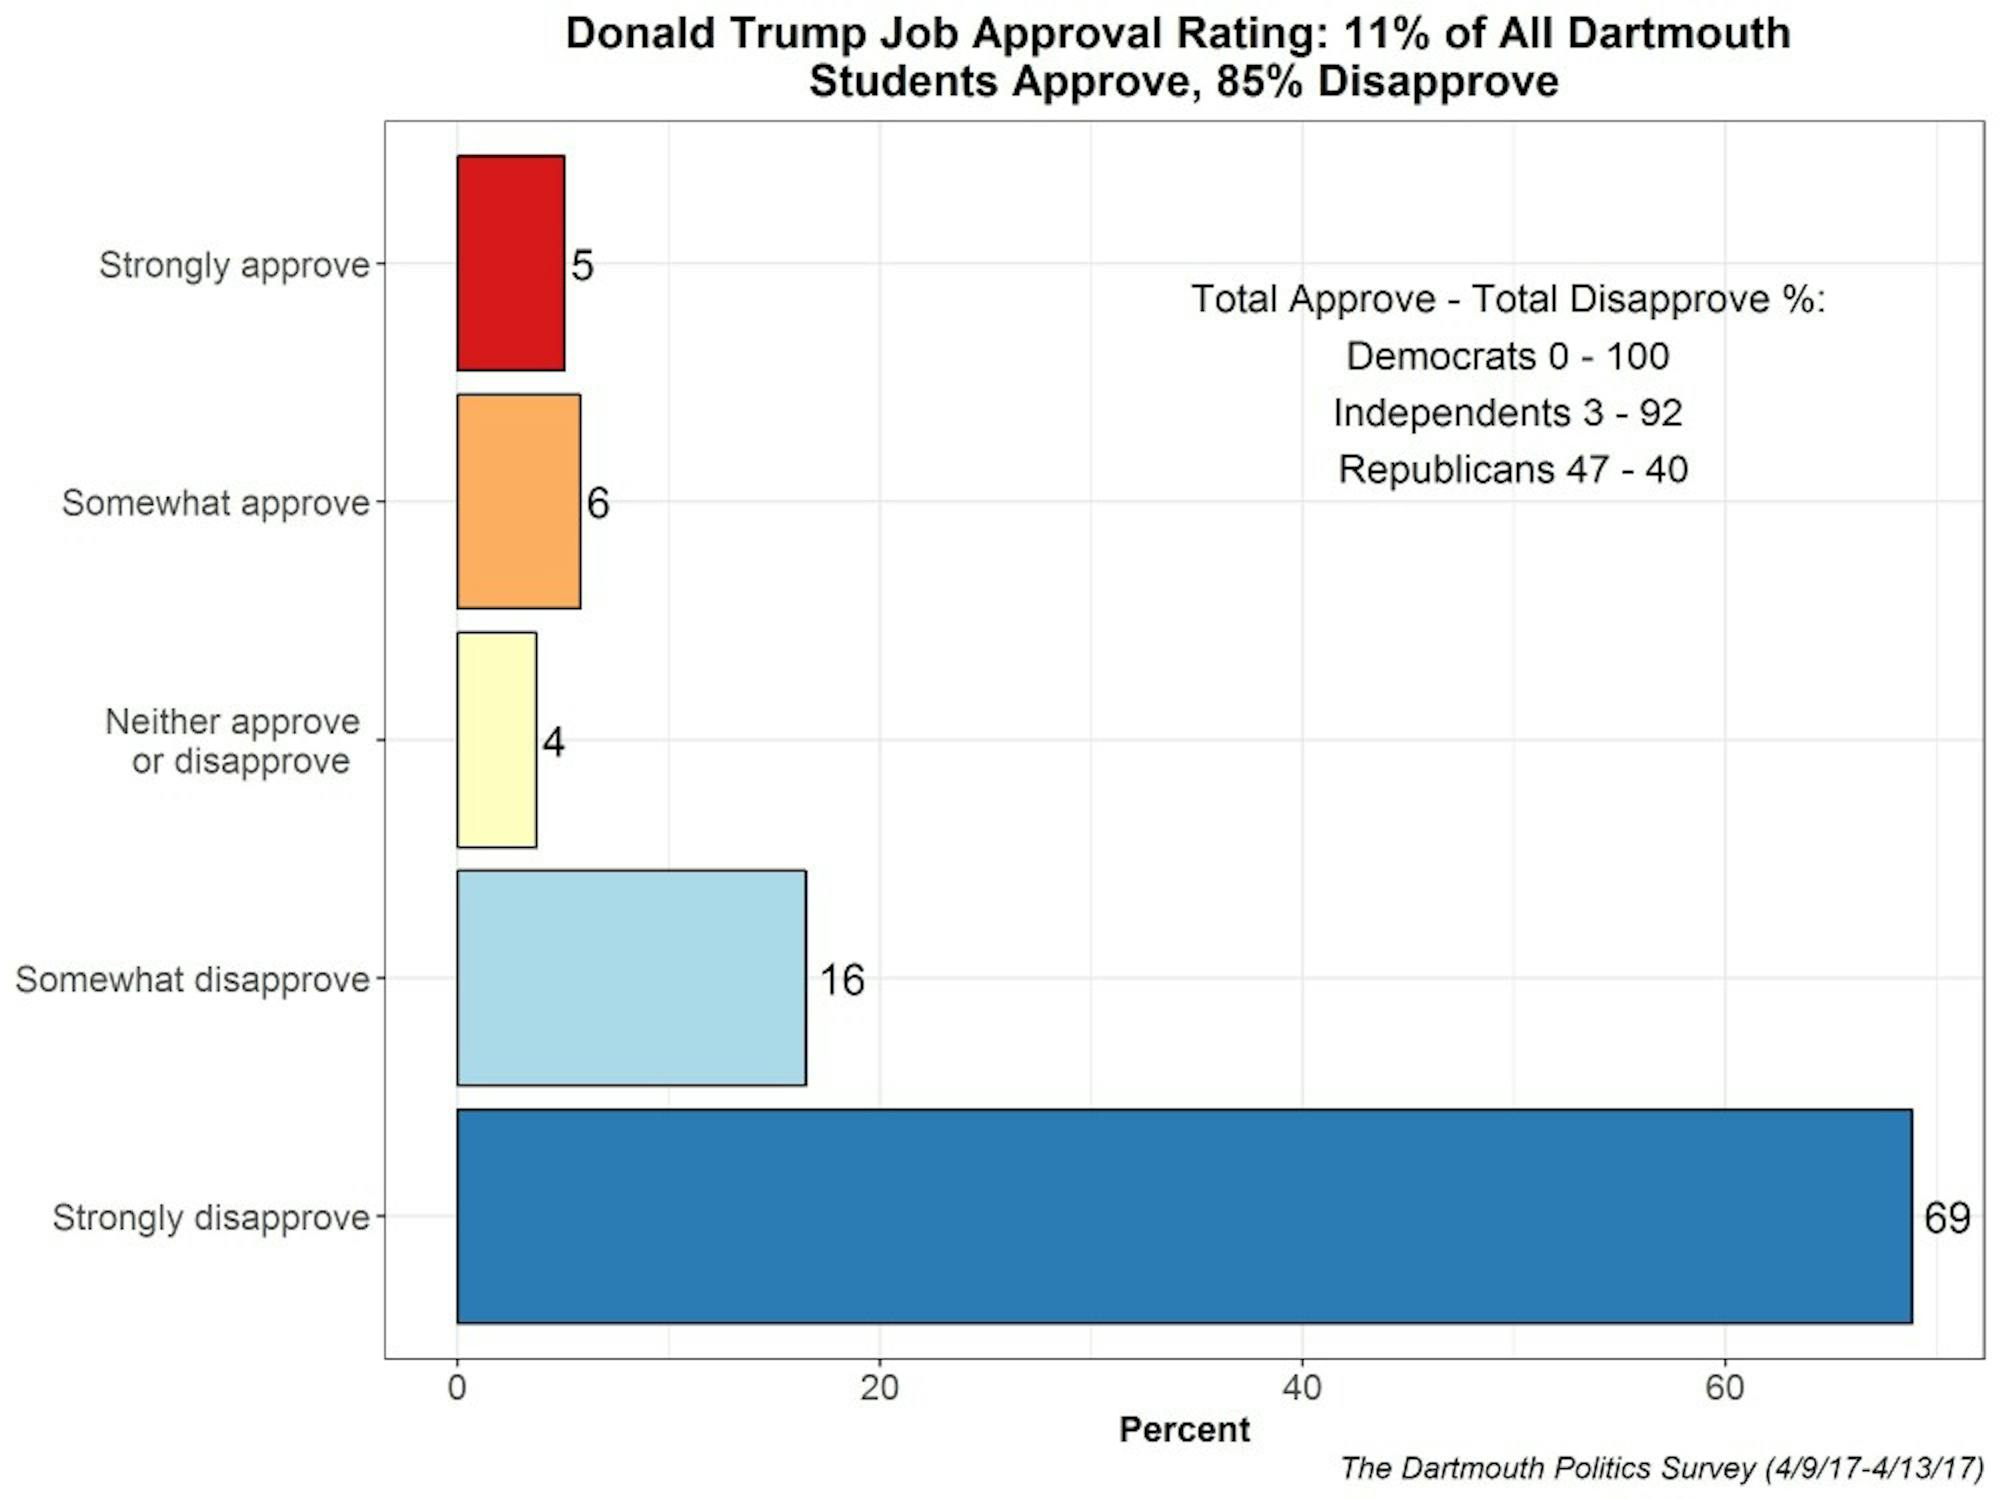 Eleven percent of students said they strongly or somewhat approved of how Trump is handling his job as president, while 85 percent said they strongly or somewhat disapproved. Just under 100 percent of Democrats said they disapprove.